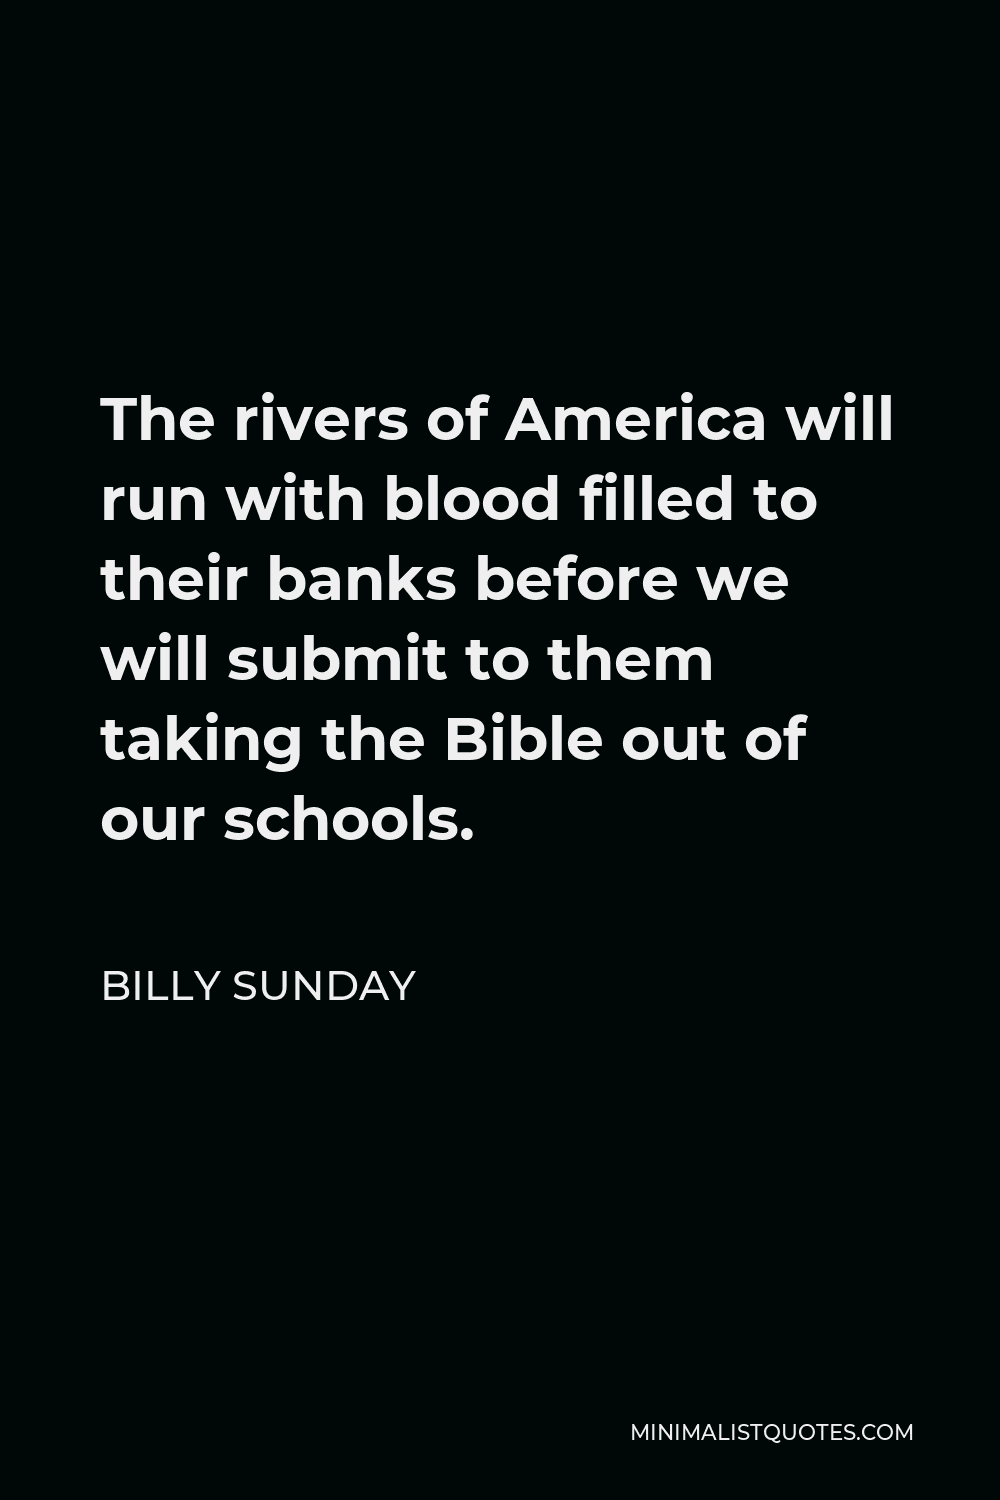 Billy Sunday Quote - The rivers of America will run with blood filled to their banks before we will submit to them taking the Bible out of our schools.